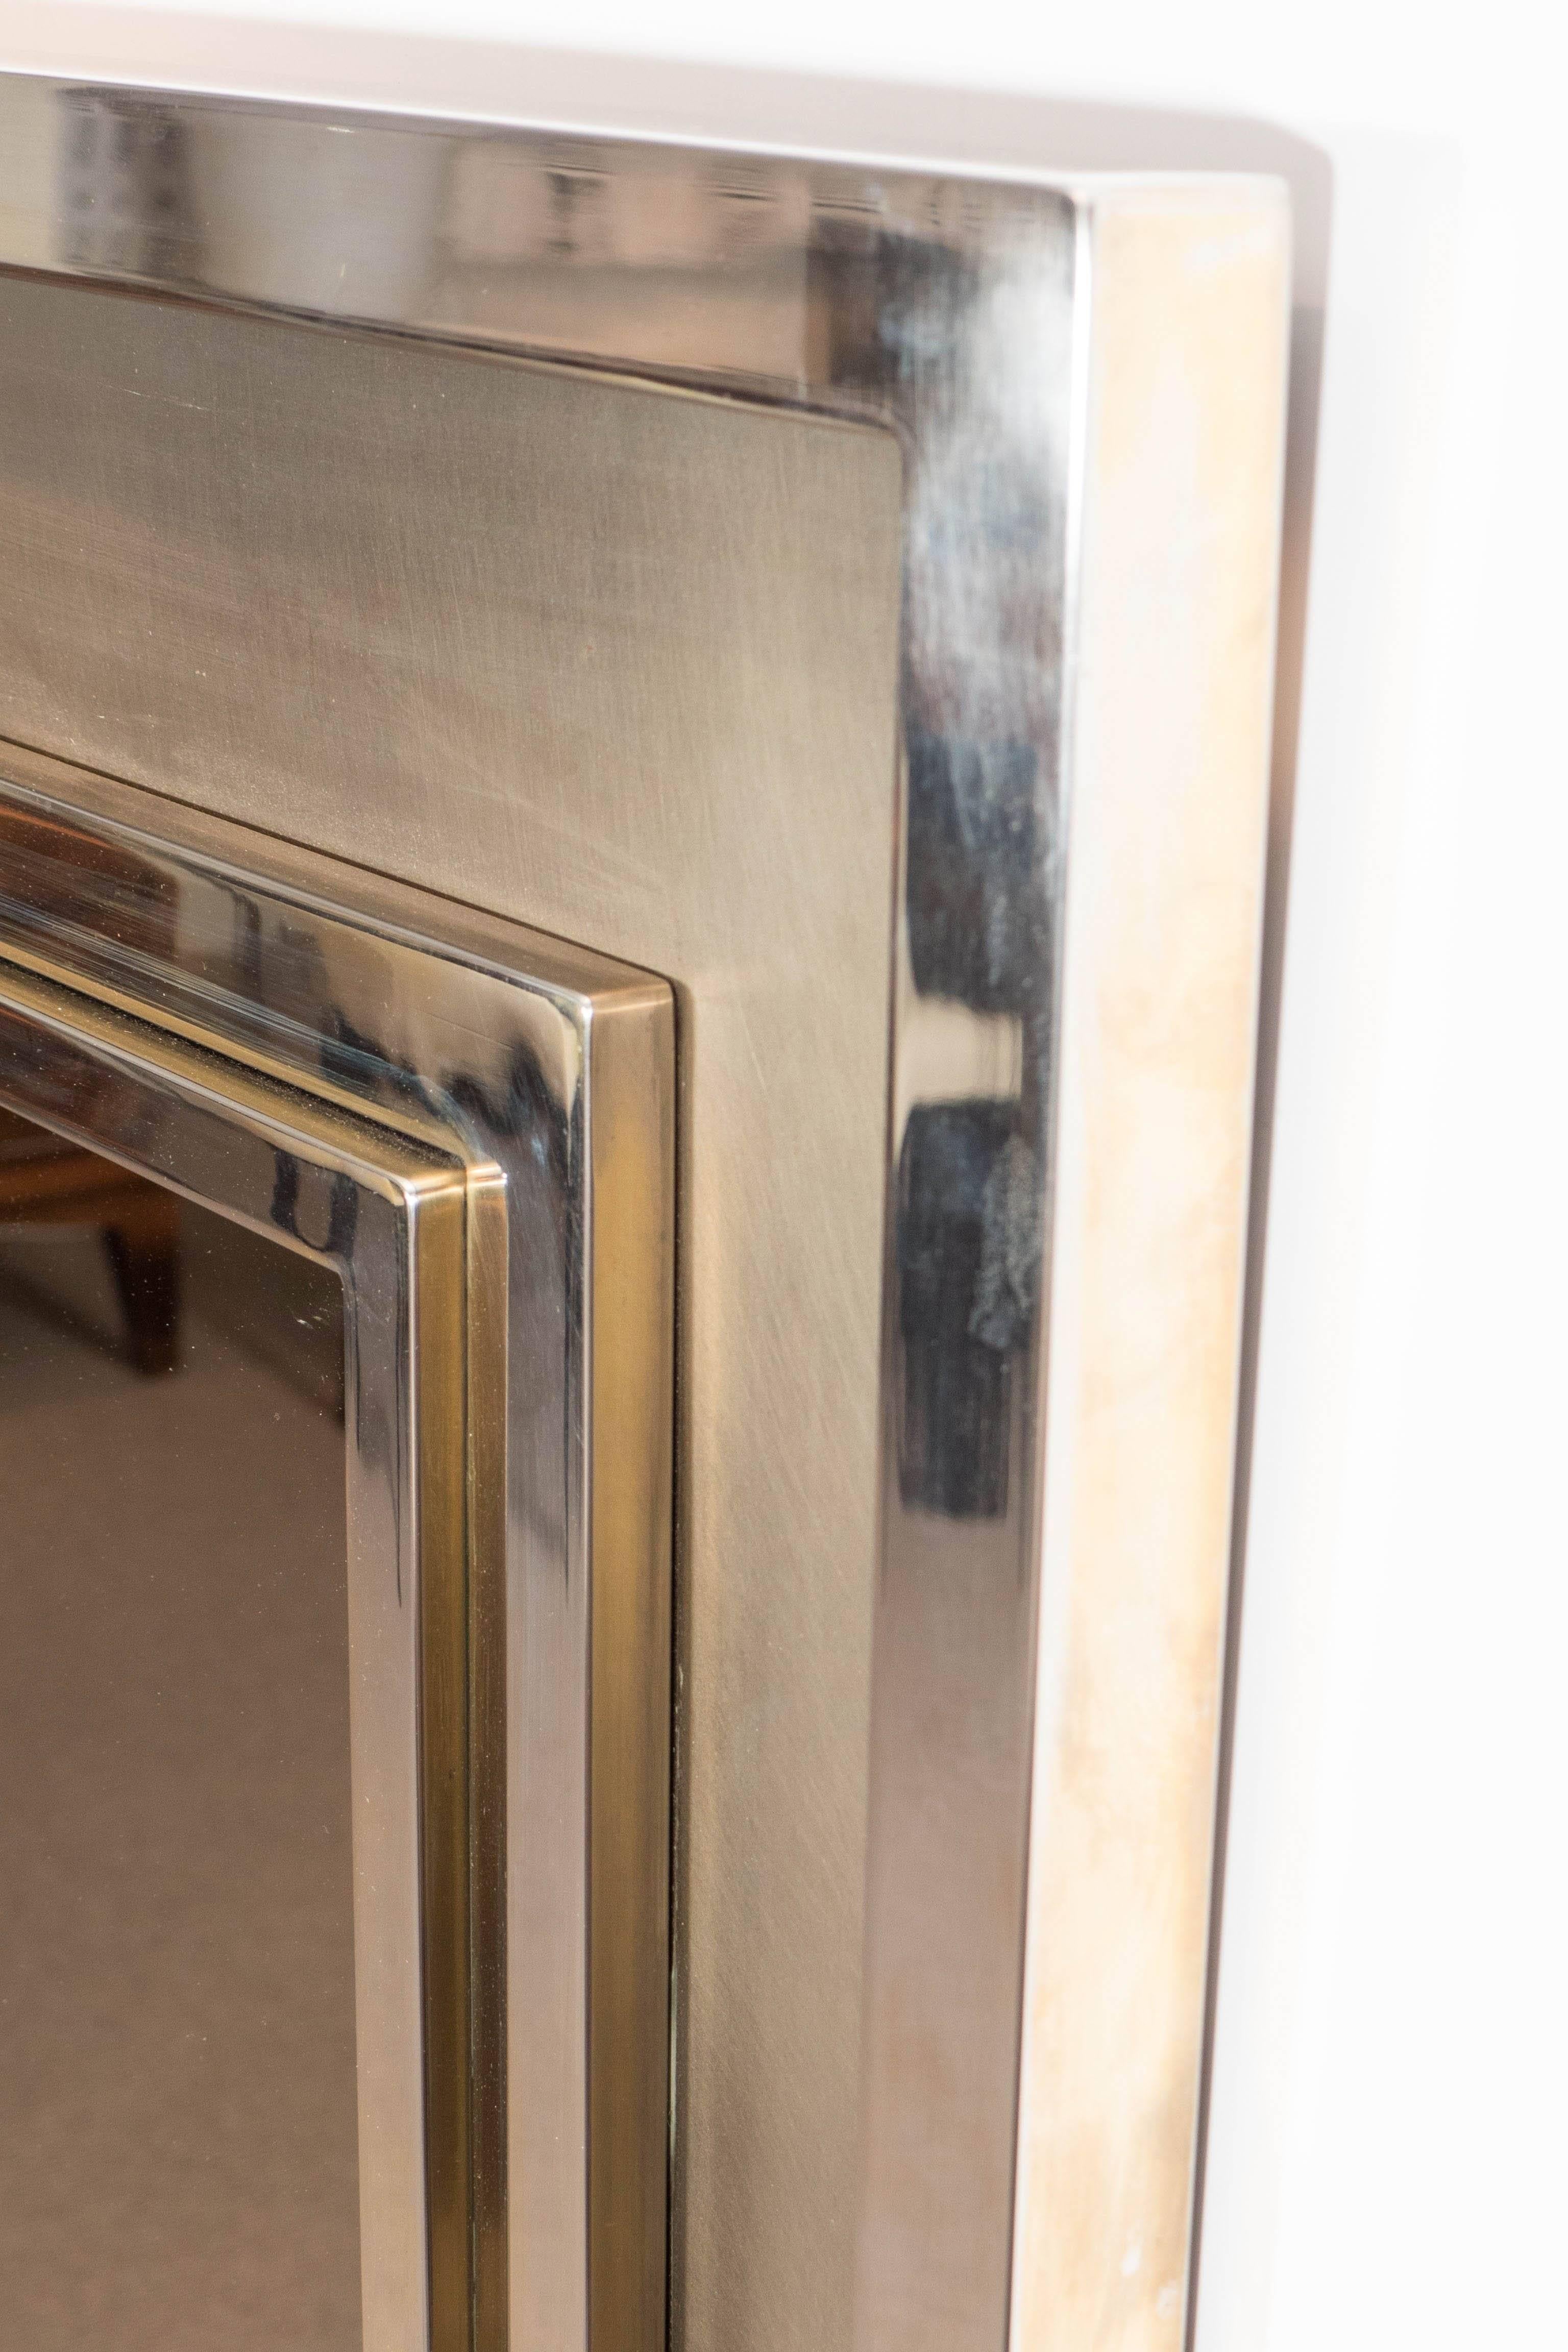 Polished chrome mirror with polished and satin brass inner frame.